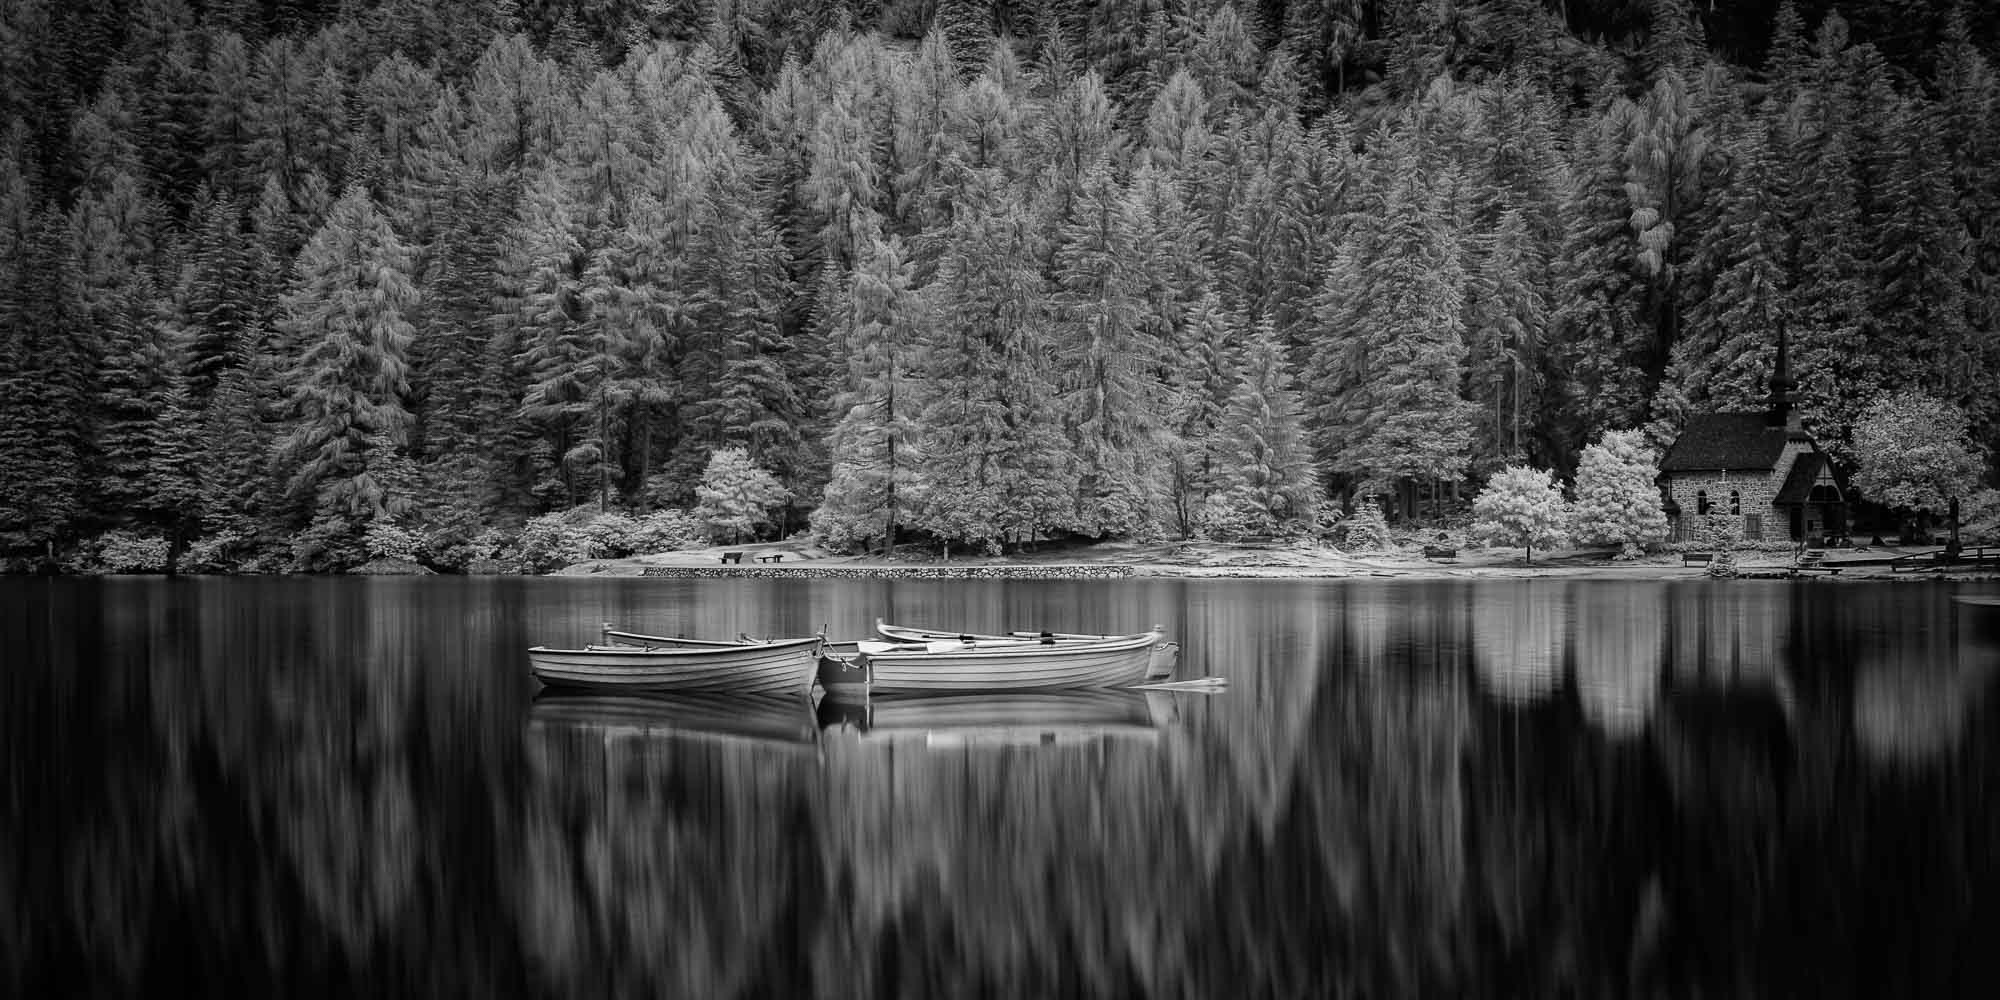 Black and white image of Lago di Braies with still water, reflective boats, a small chapel, and dense trees in the background.